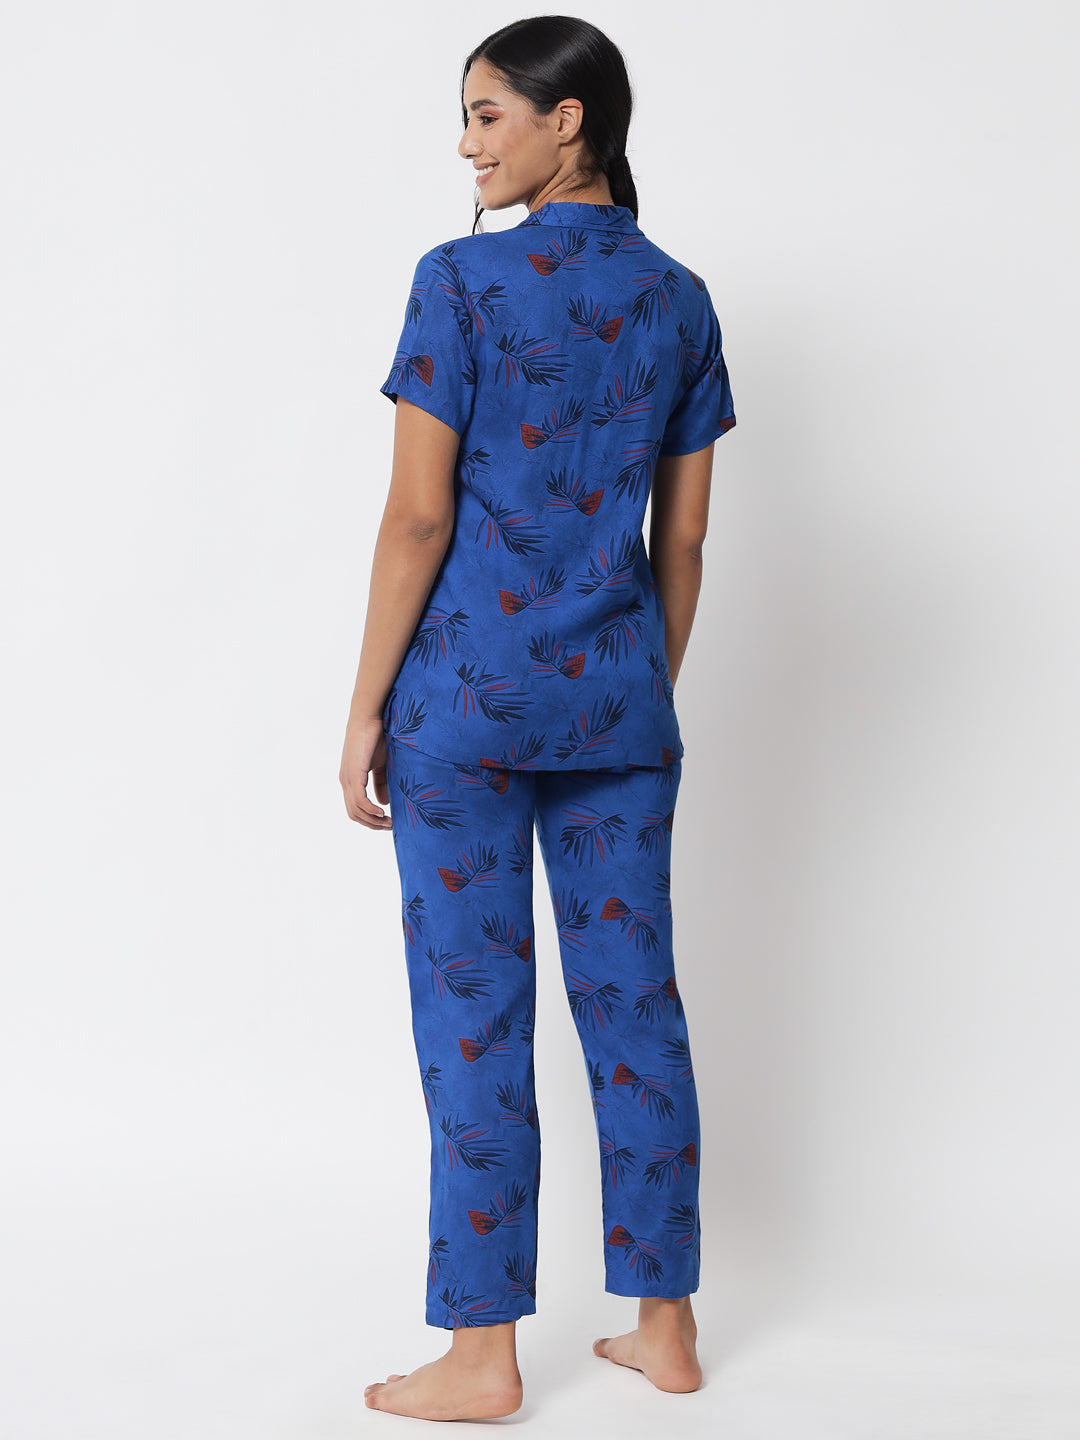 printed-button-down-nightsuit-for-women-n75n